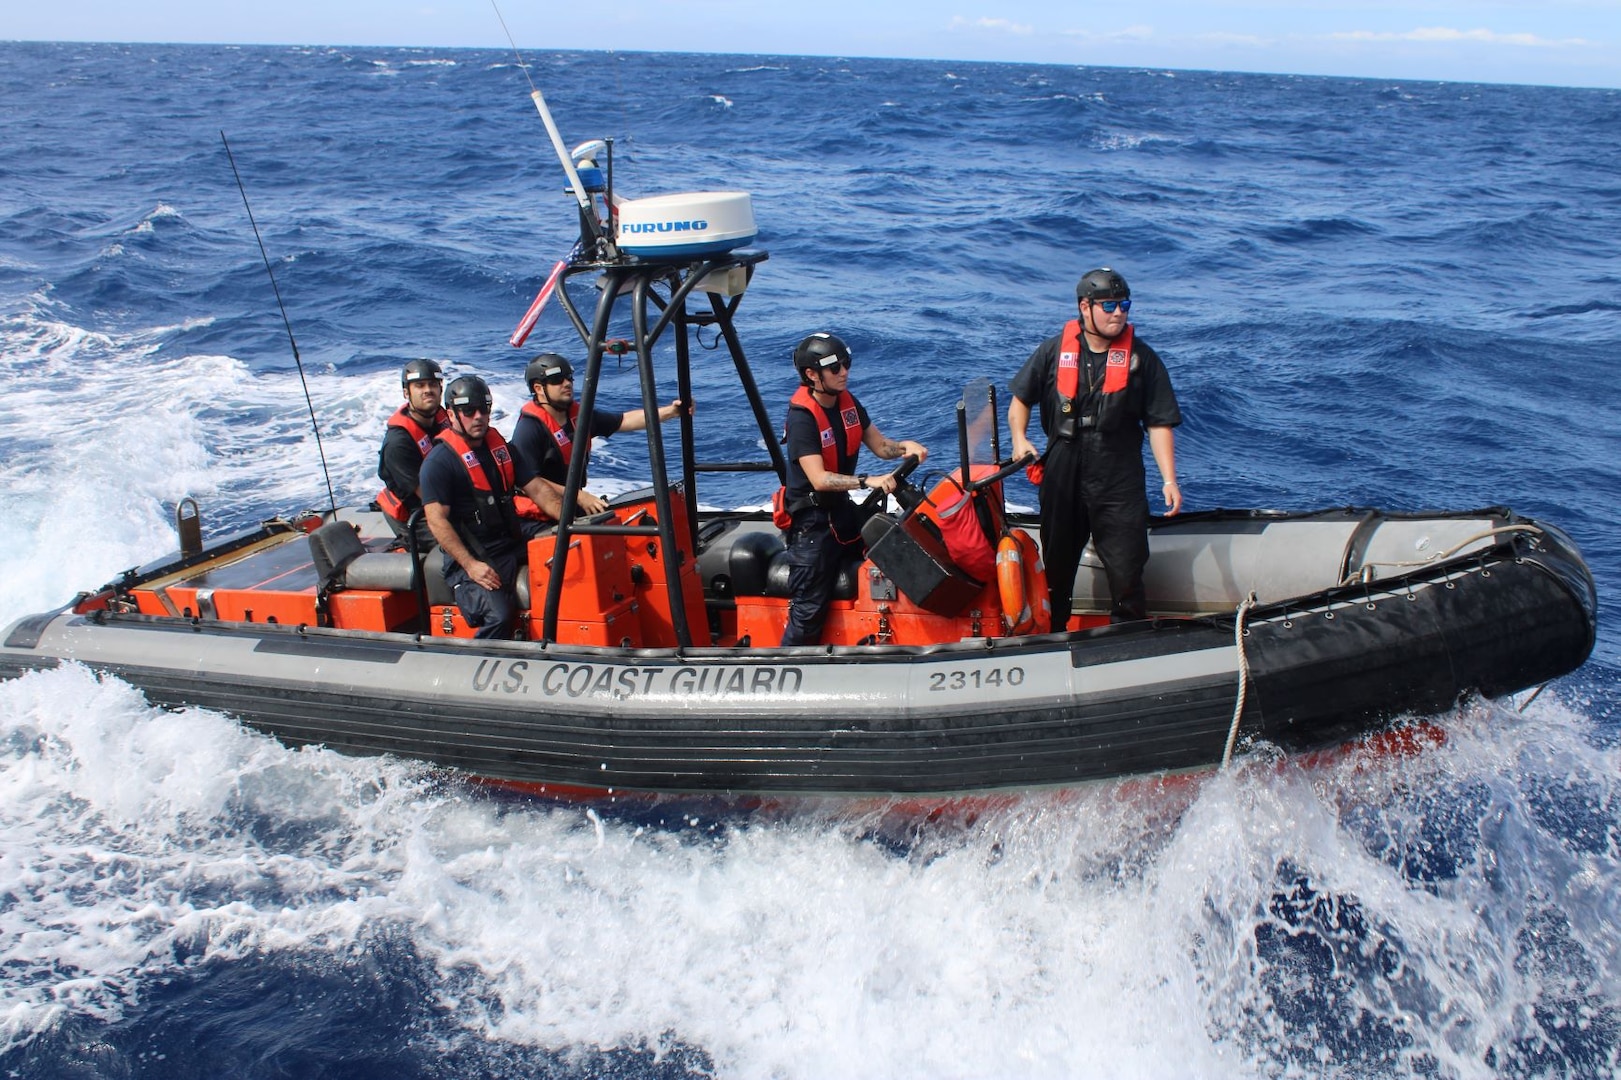 U.S. Coast Guard crewmembers assigned to Coast Guard Cutter Dauntless (WMEC 624) conduct training with the cutter’s small boat in the Caribbean Ocean, Nov. 25, 2023. Dauntless deployed to conduct maritime safety and security operations.